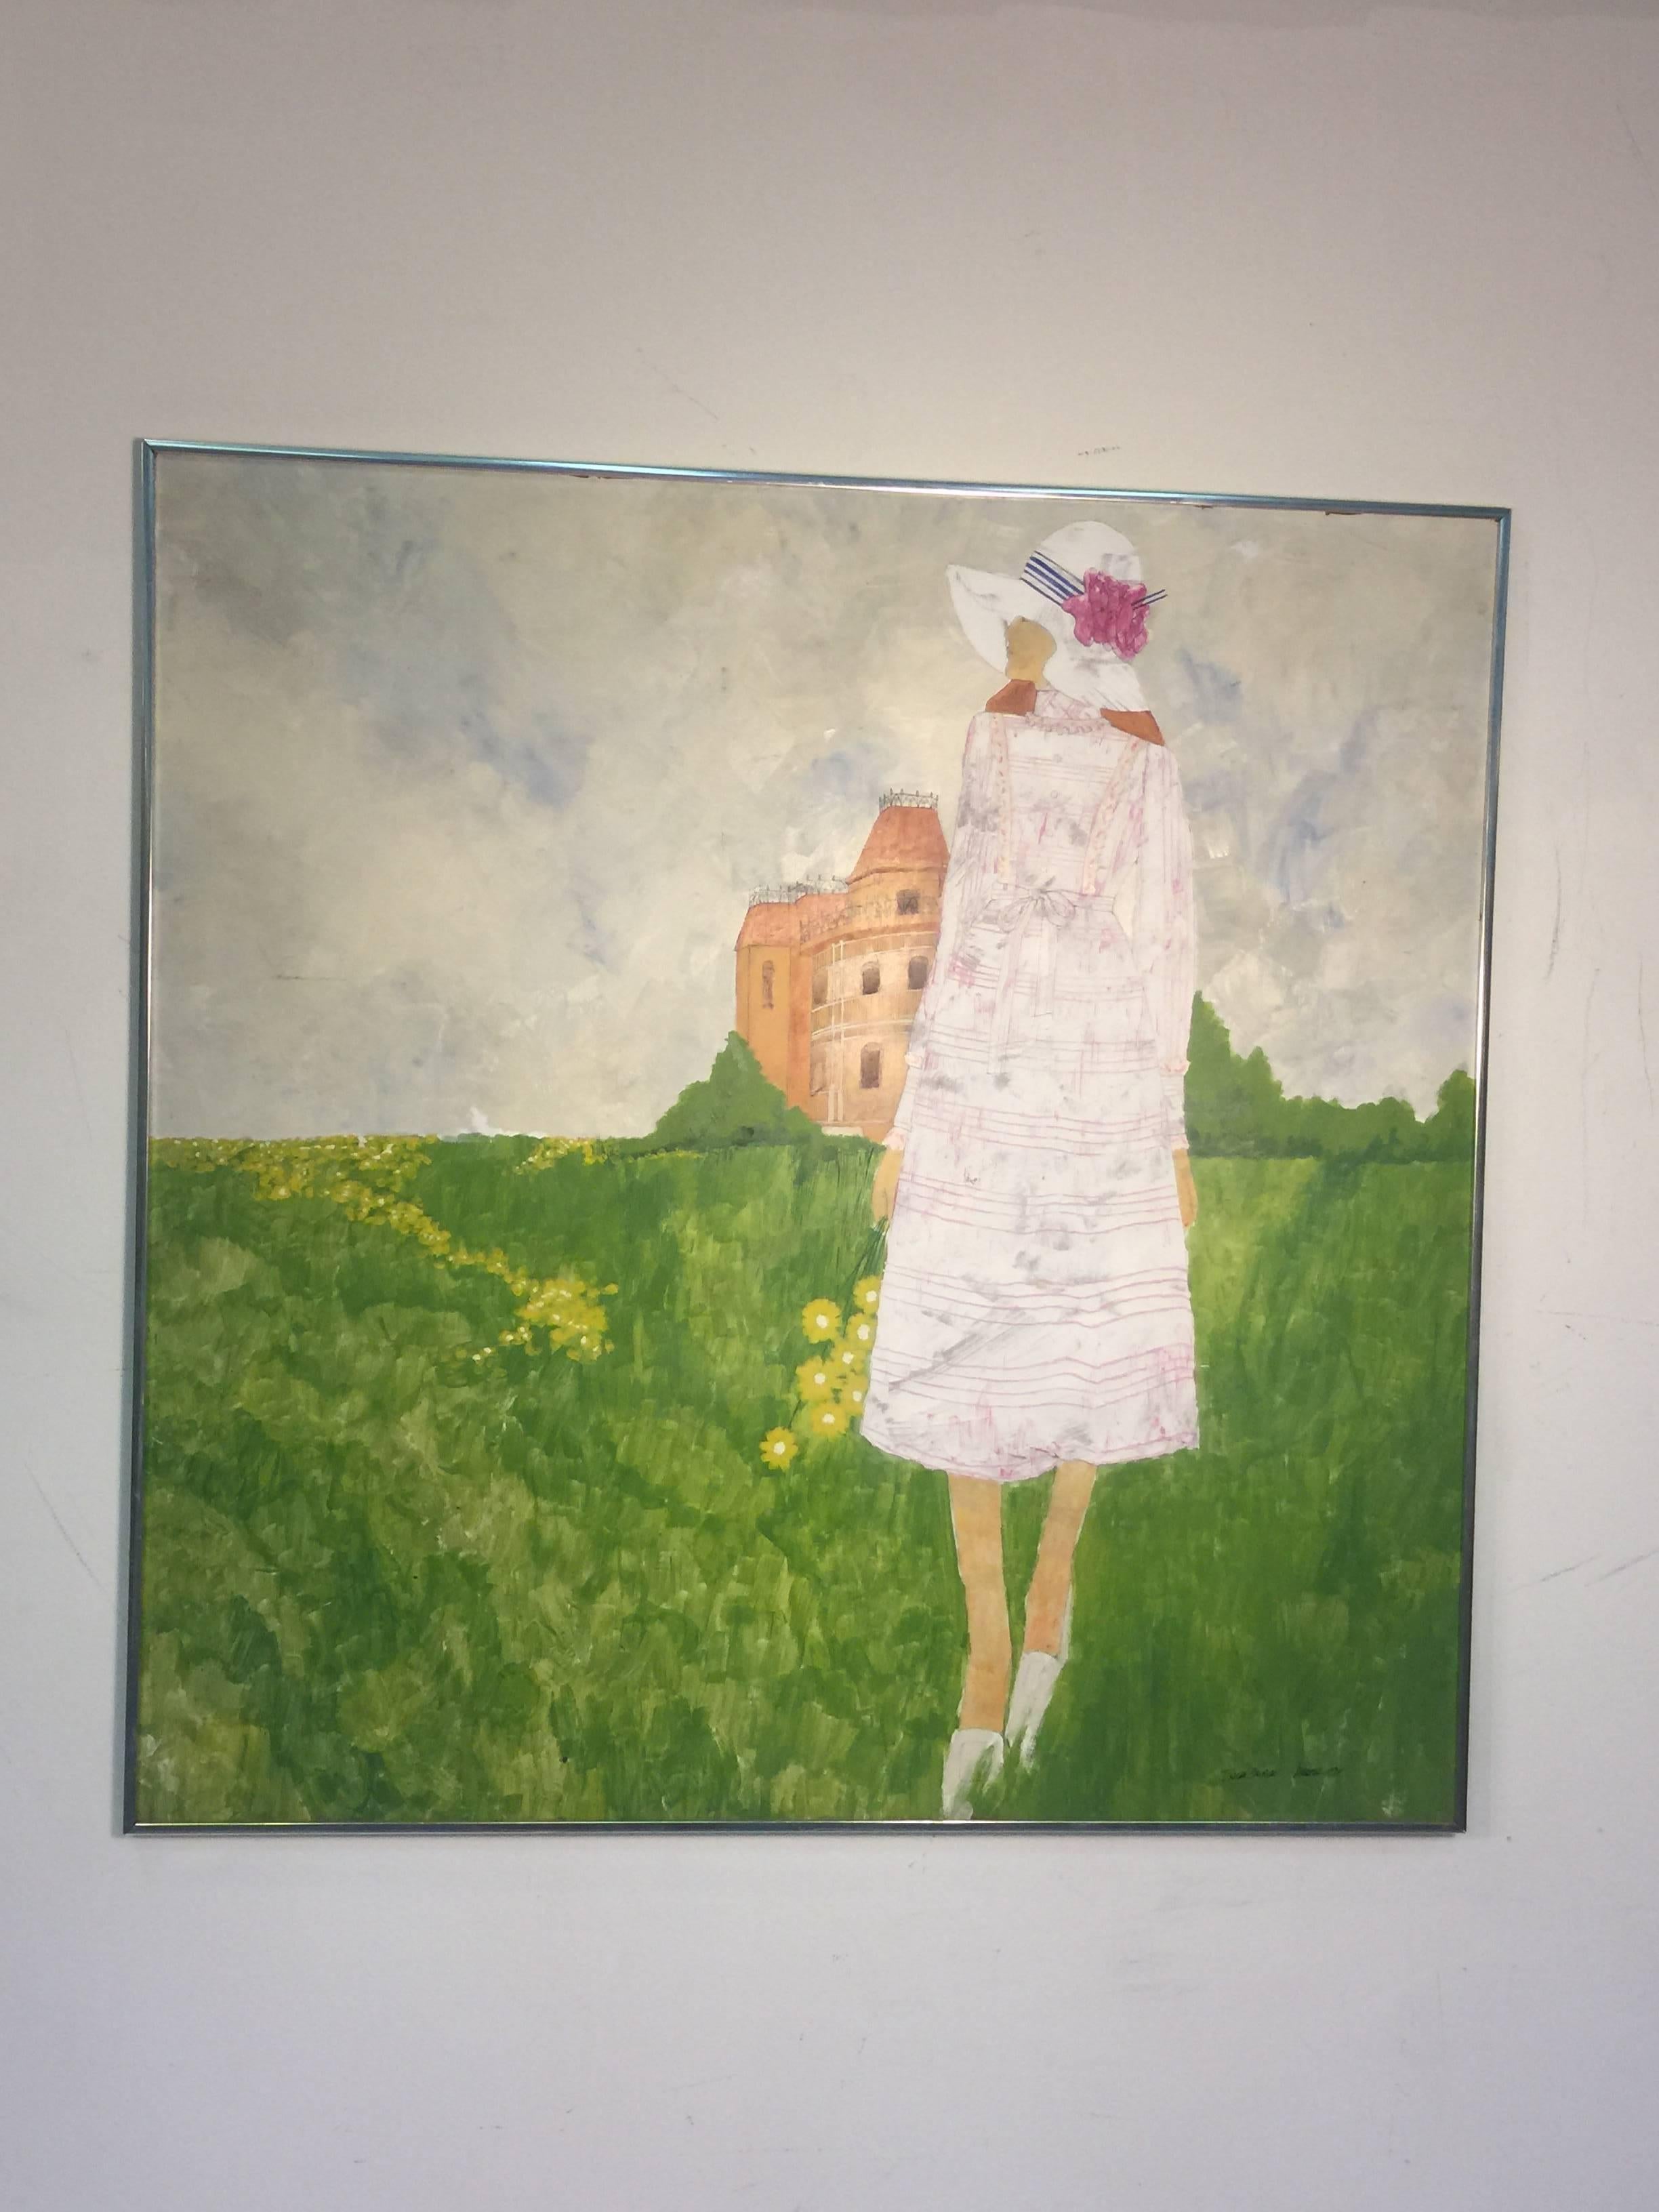 Atmospheric painting on board of a woman in 1970s fancy dress and hat gathering yellow wild flowers in a field with a Victorian mansion behind her. Signed by Dale Caran and dated March 1971.